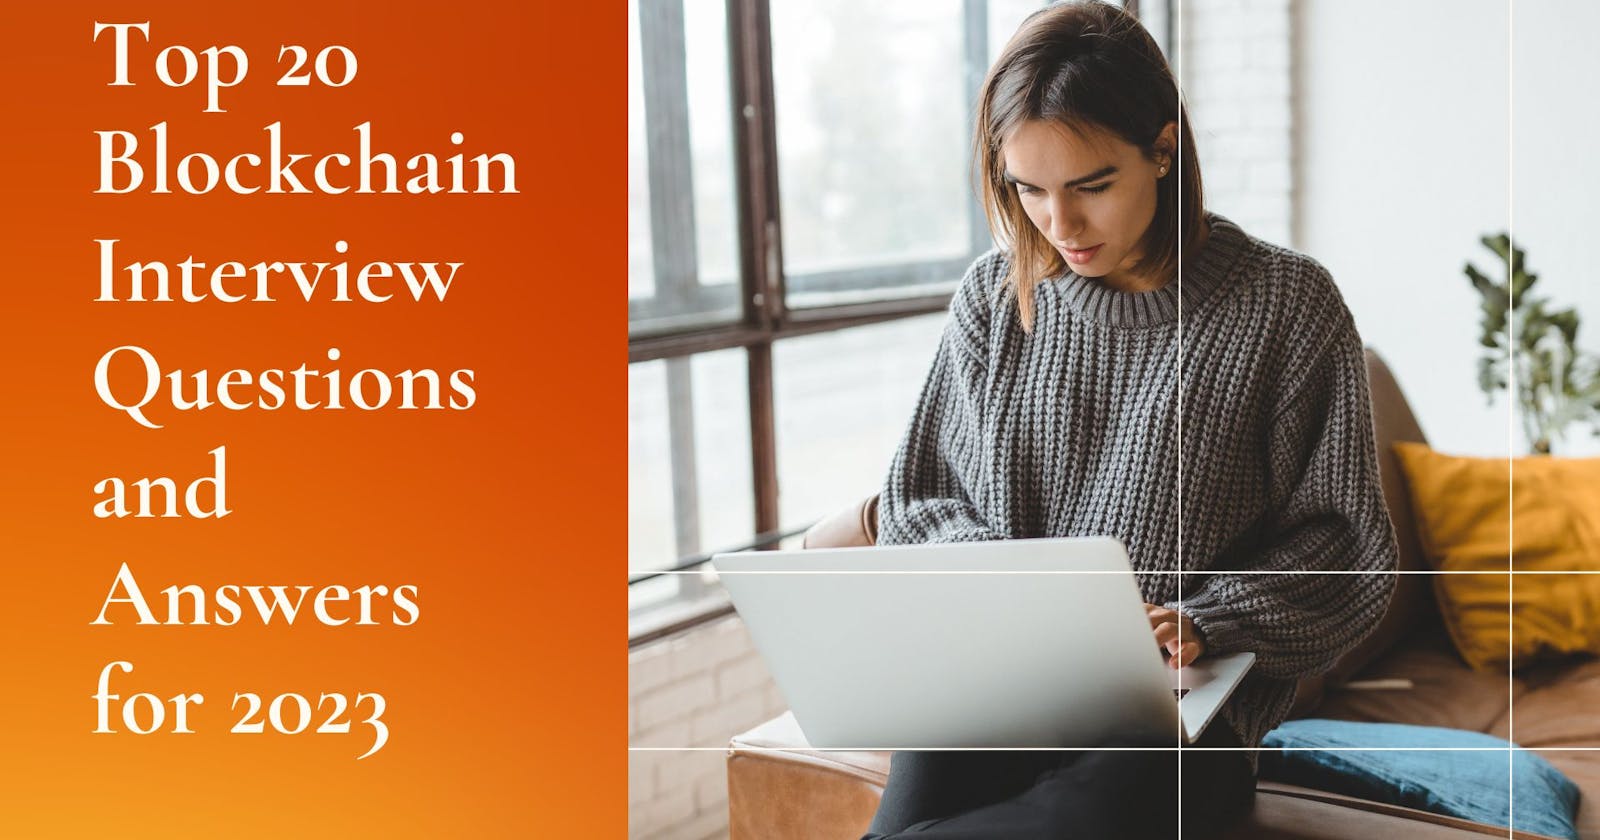 Top 20 Blockchain Interview Questions and Answers for 2023